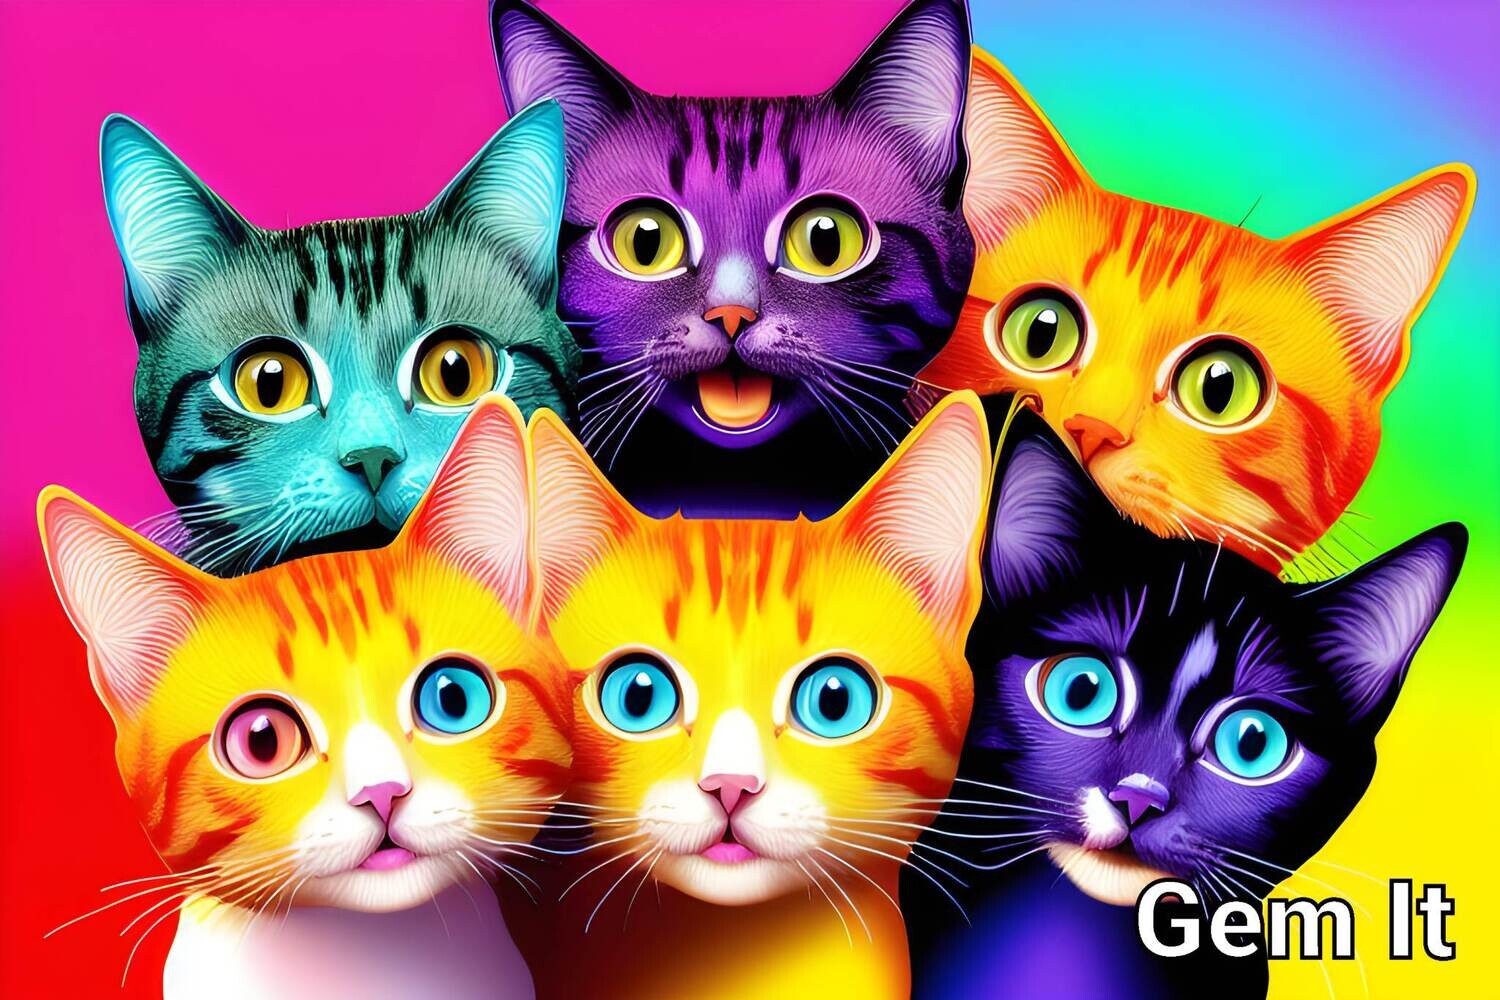 Cats Group Selfie 1 - Specially ordered for you. Delivery is approximately 4 - 6 weeks.